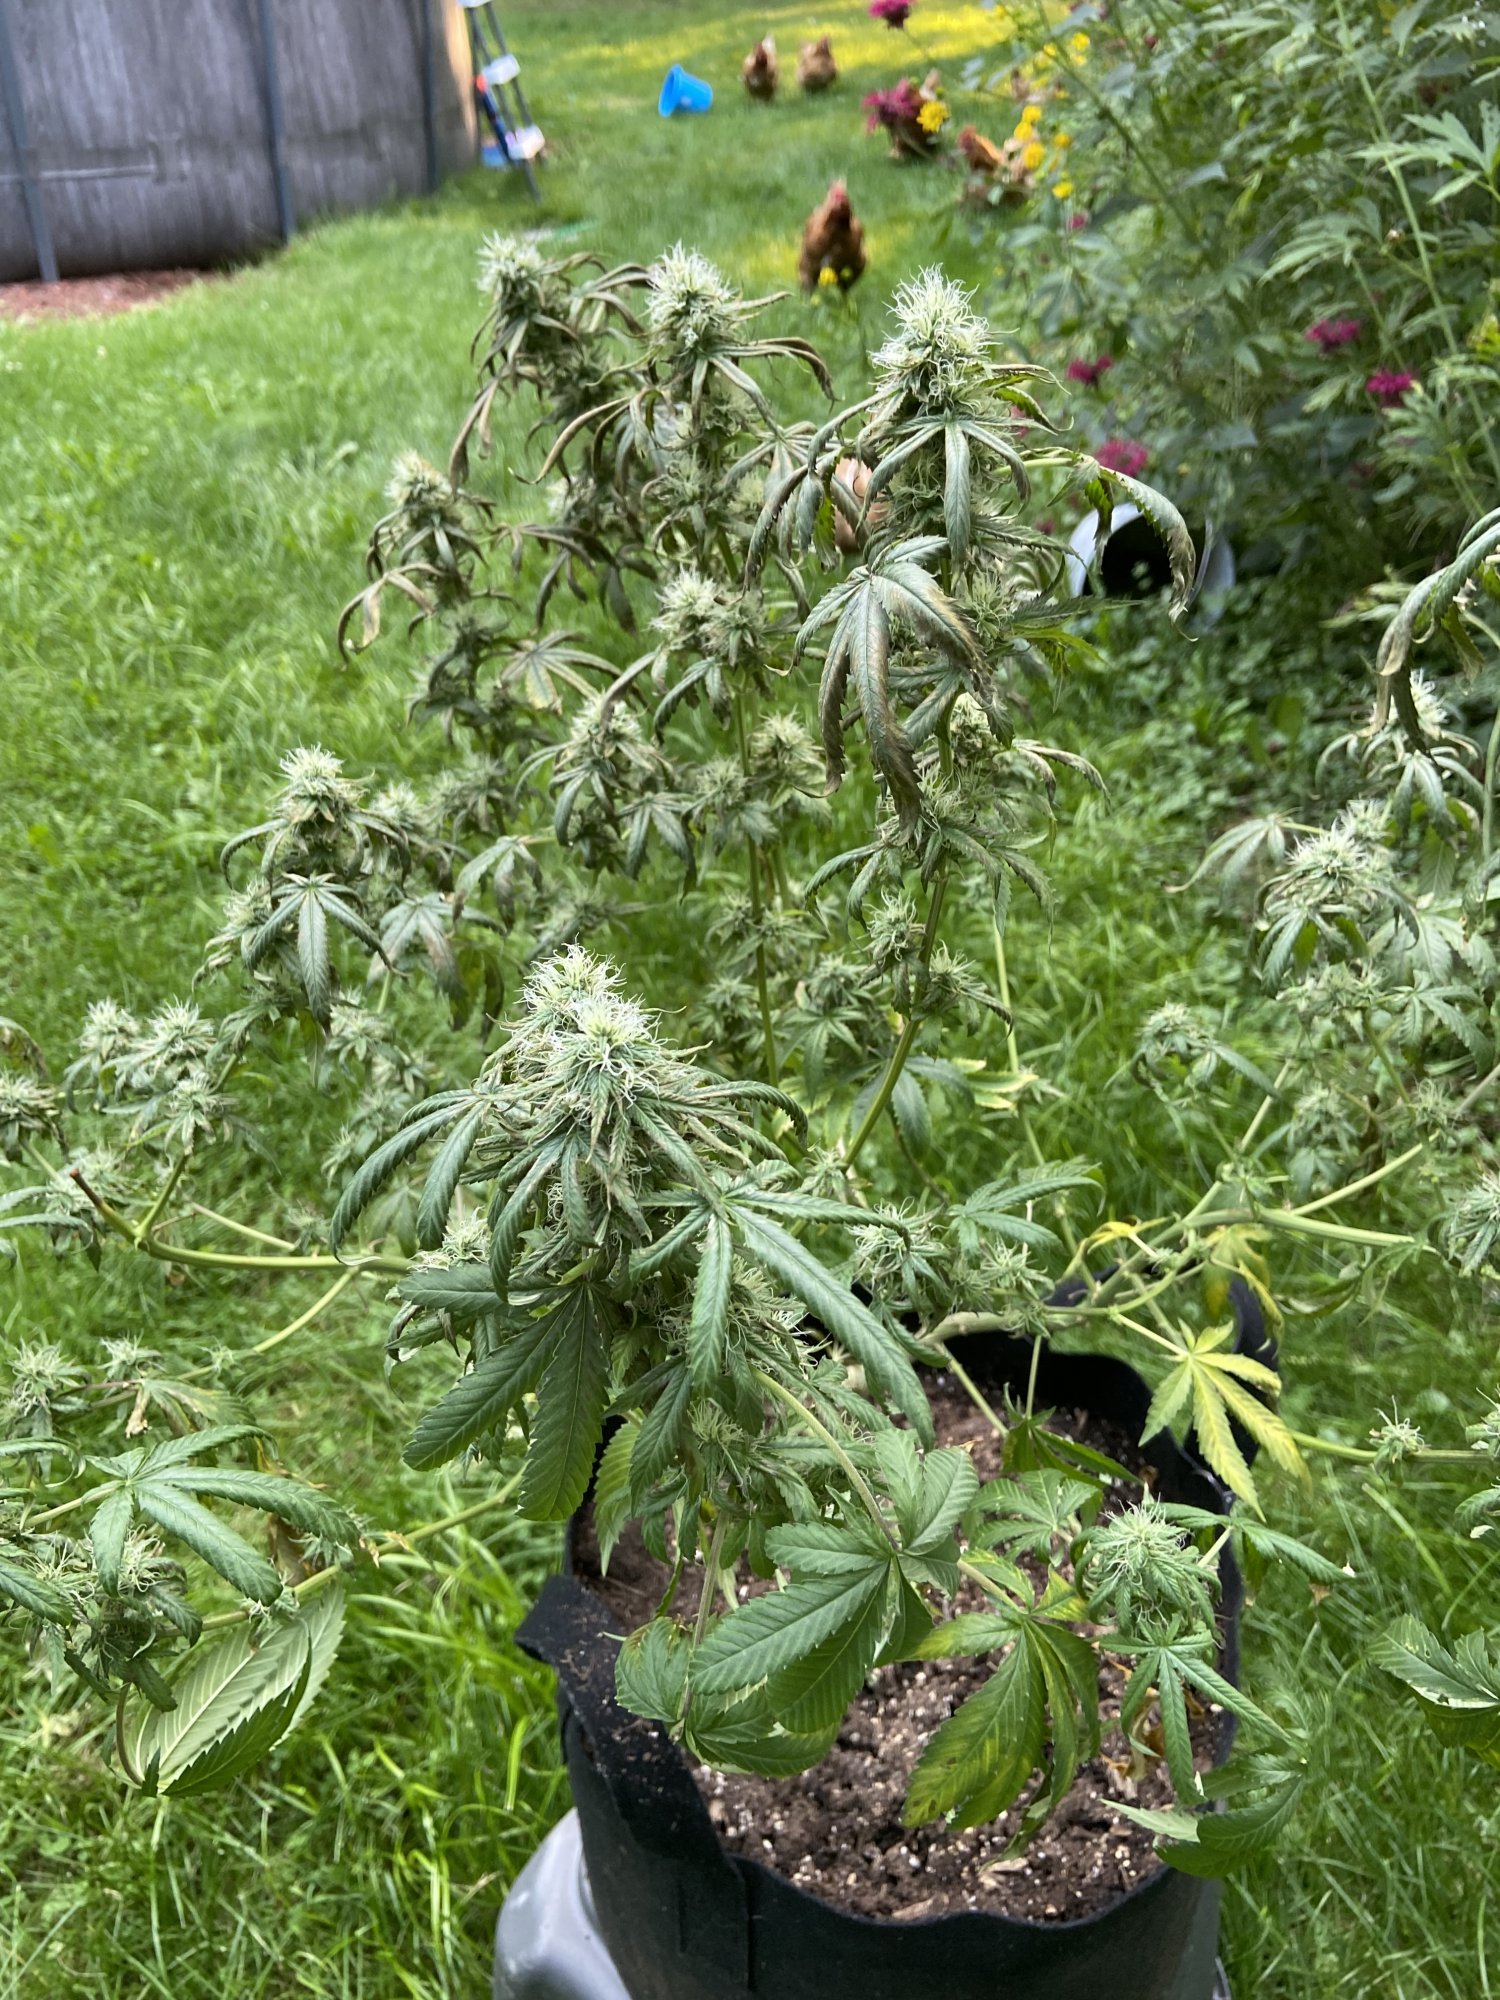 I need help with  my sour diesel 3